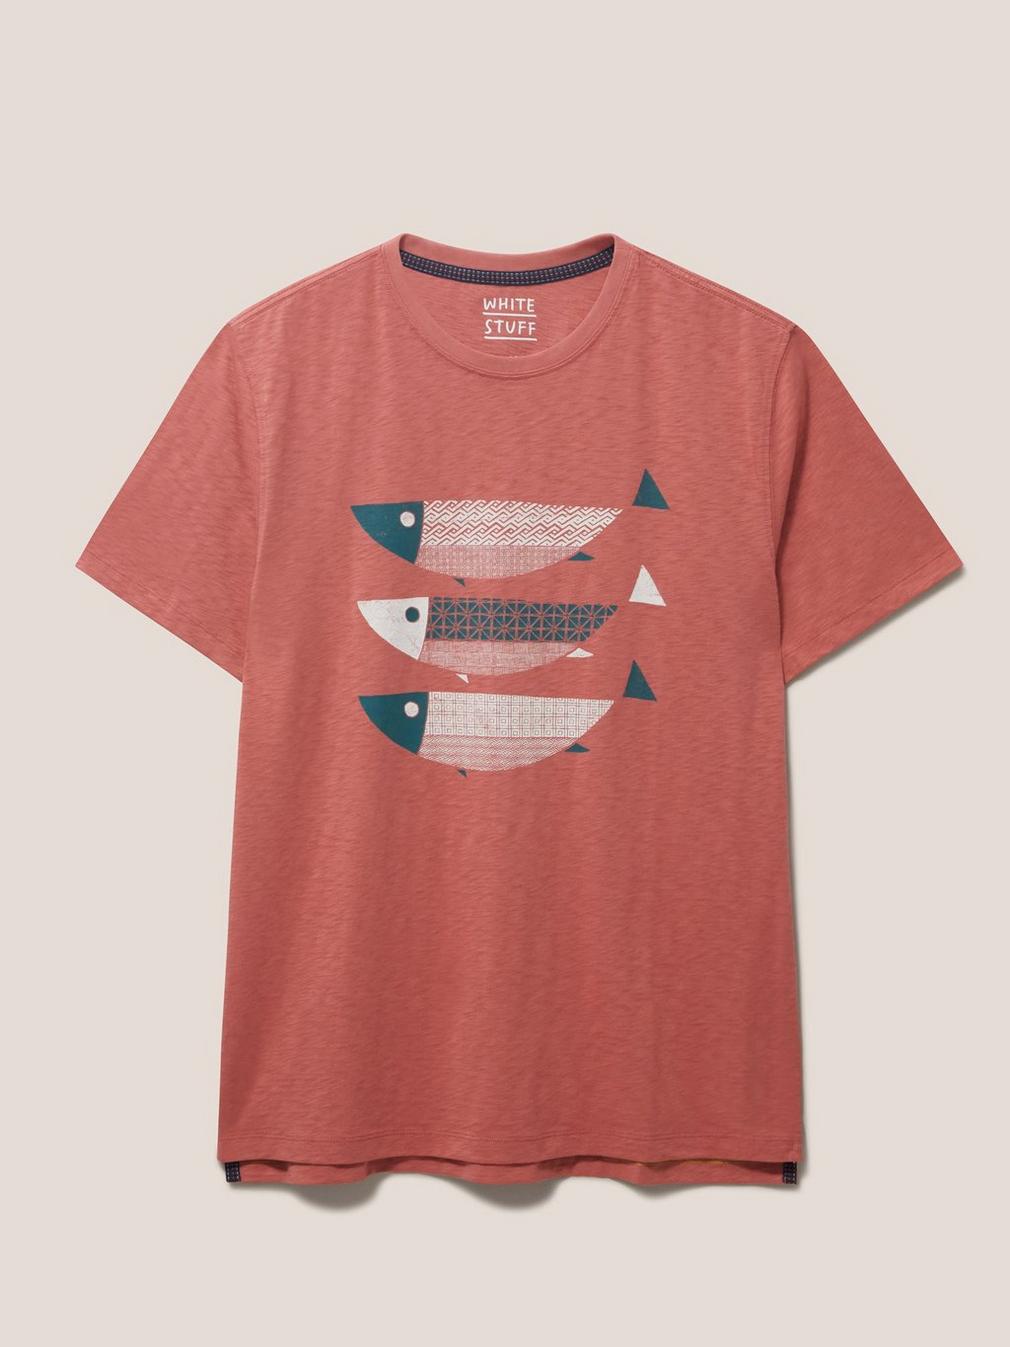 Fish Graphic Tee in DK PINK - FLAT FRONT